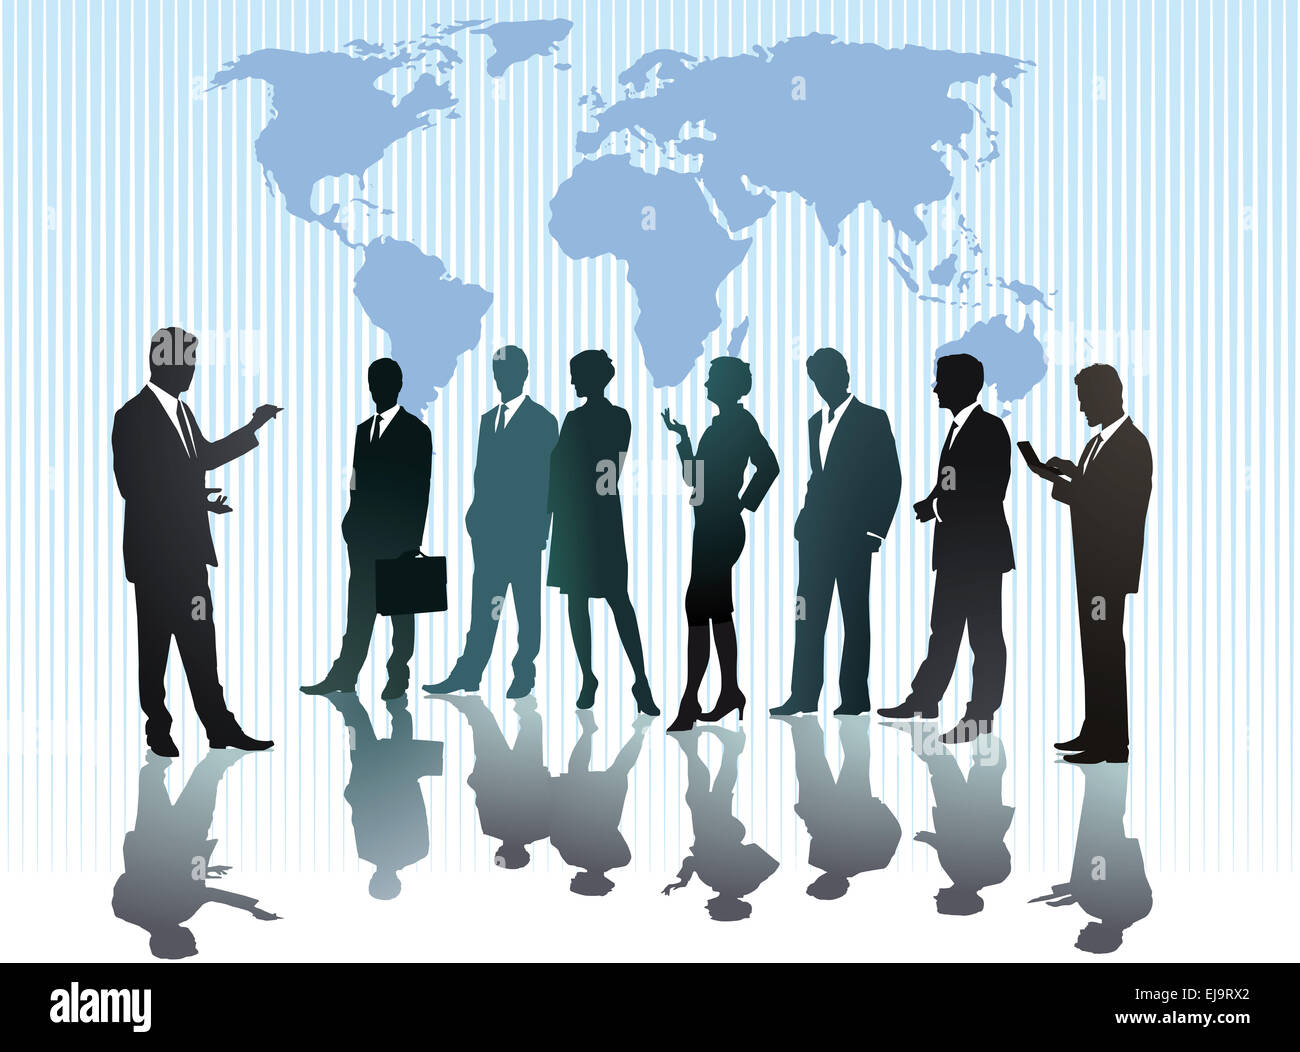 Businessmen in front of world map Stock Photo